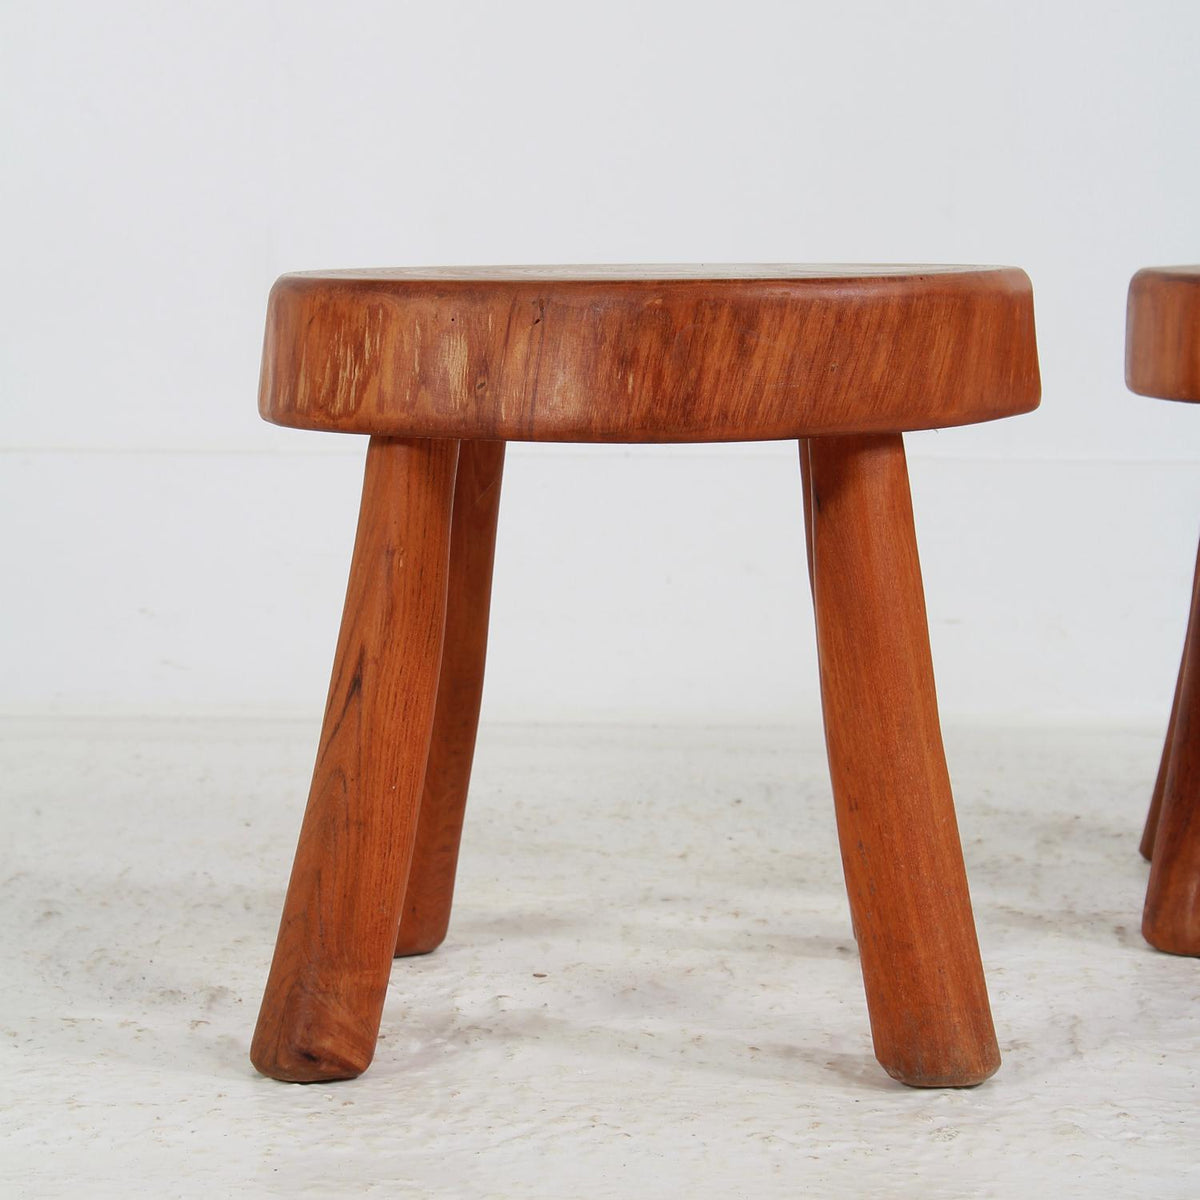 Two Mid-Century Modern Wood Stools in the Style of Charlotte Perriand